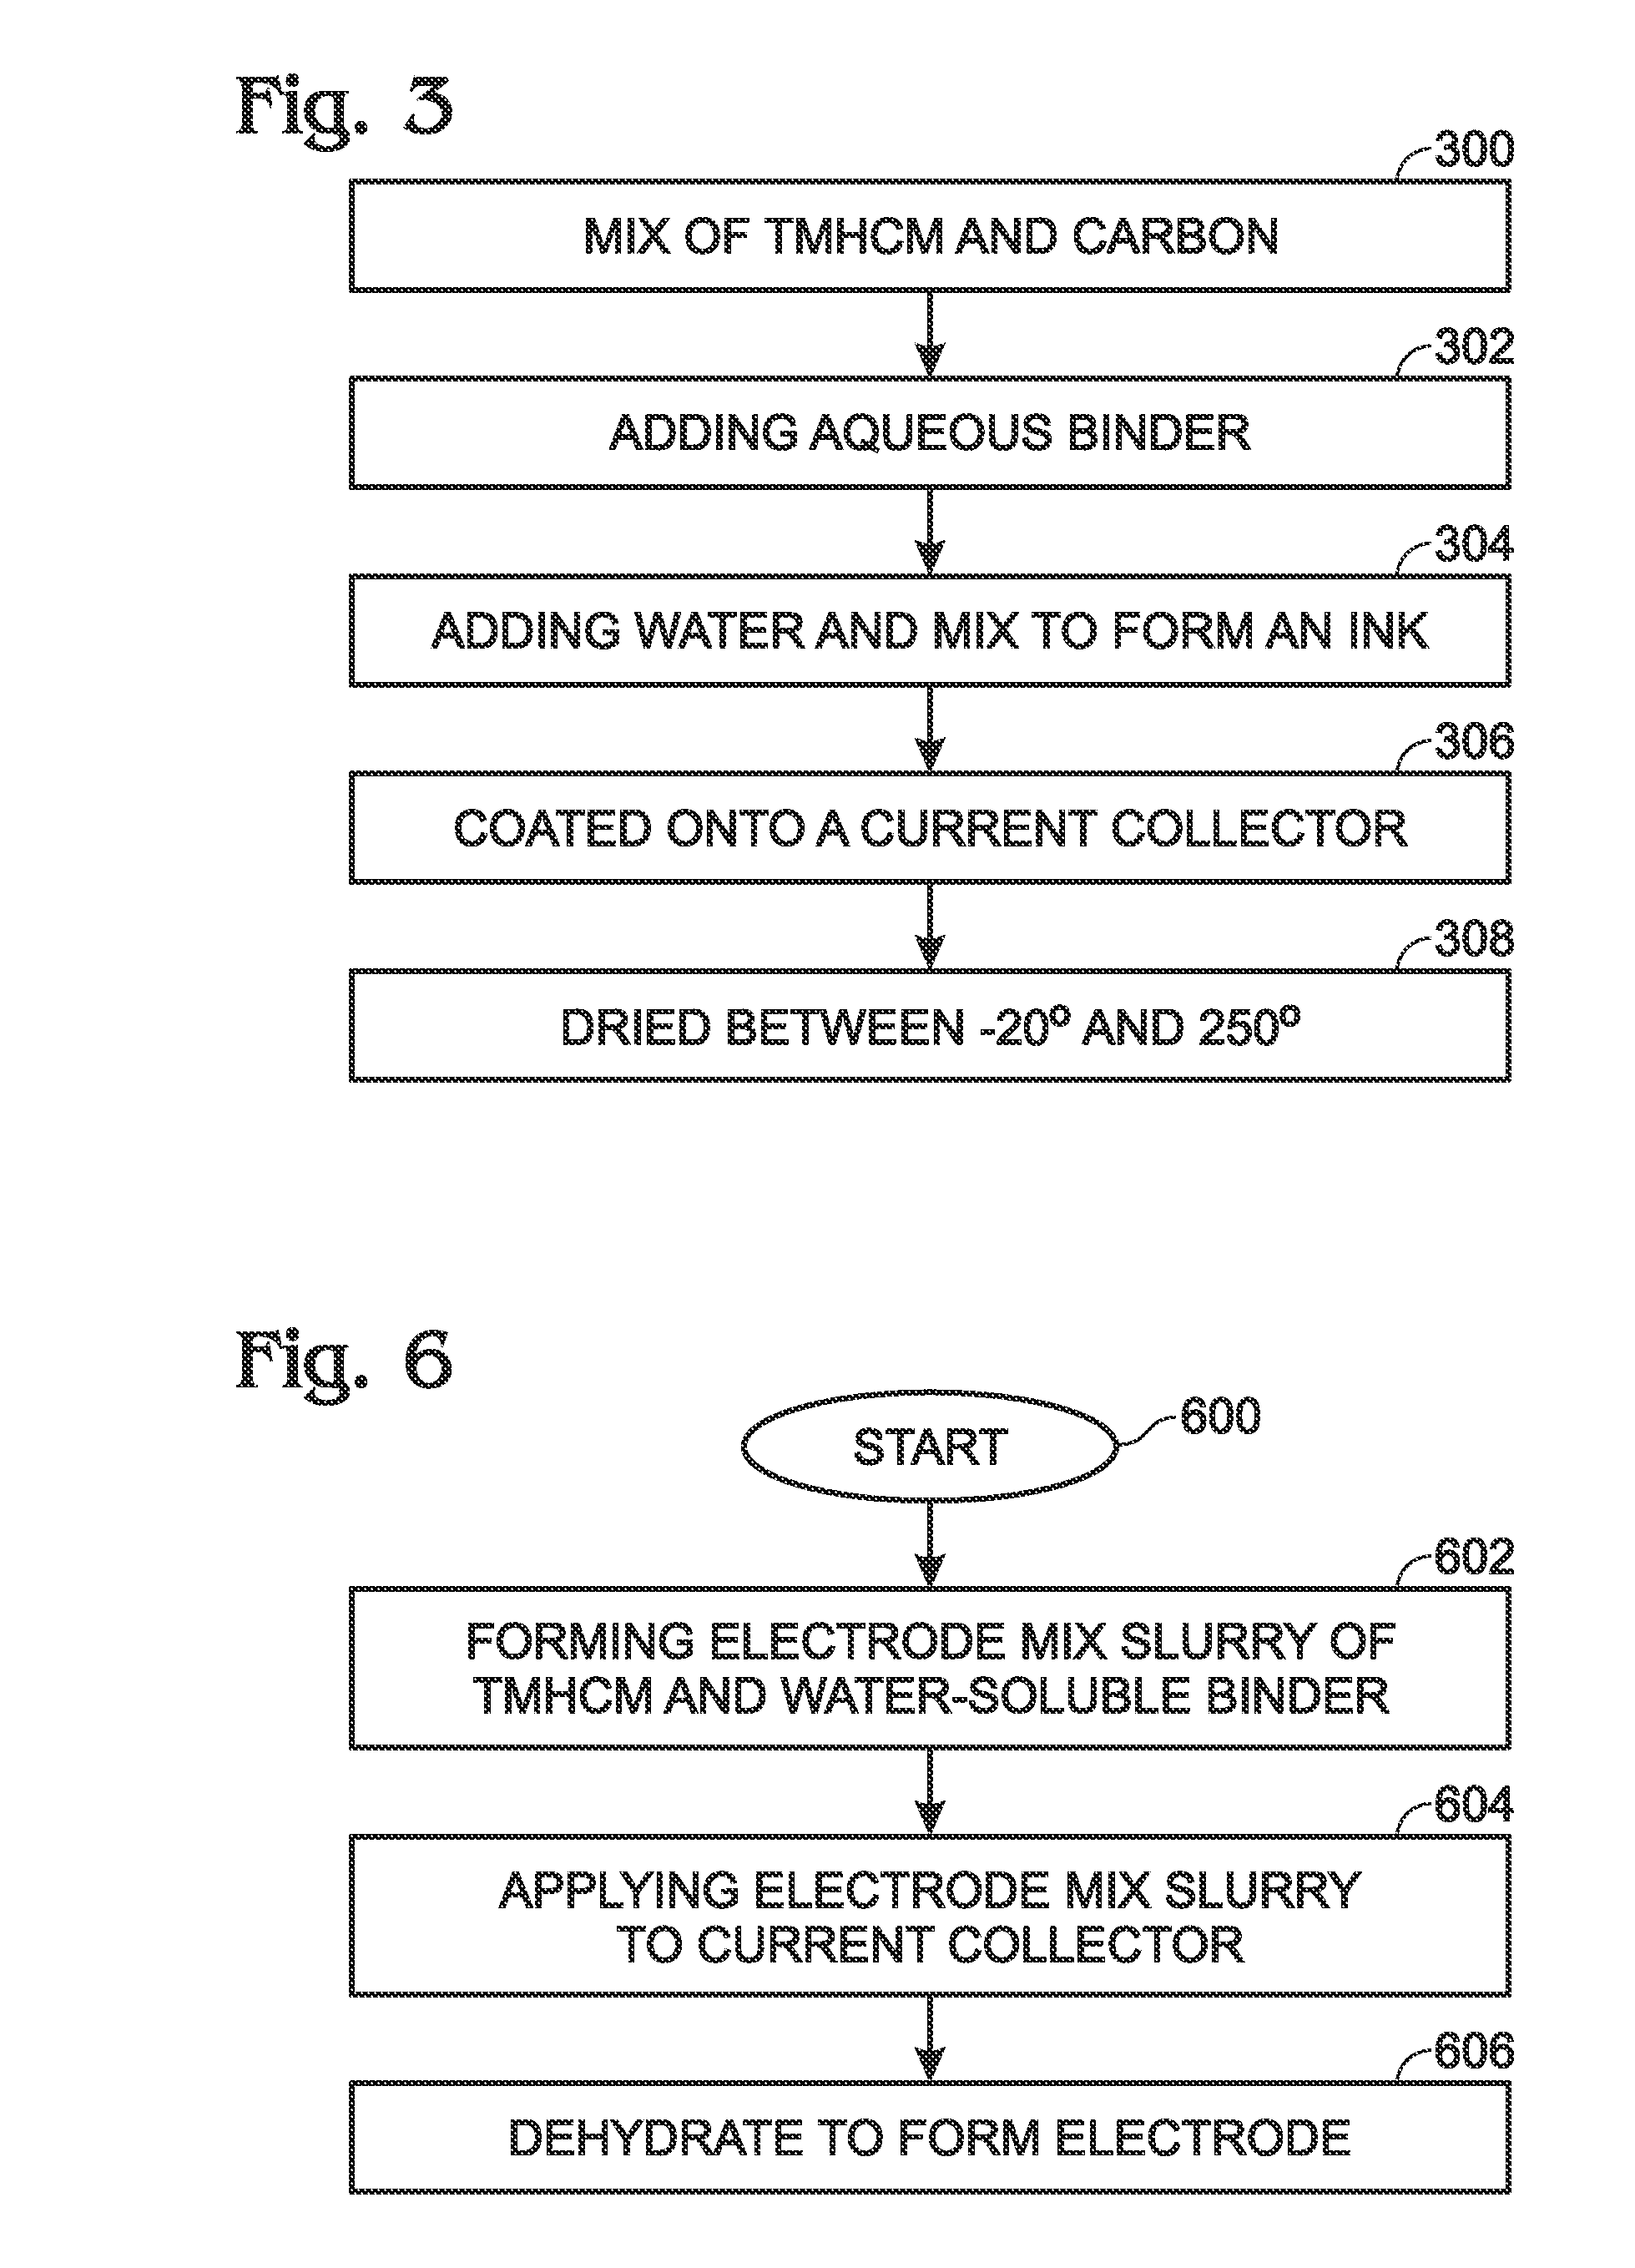 Transition Metal Hexacyanometallate Electrode with Water-soluble Binder